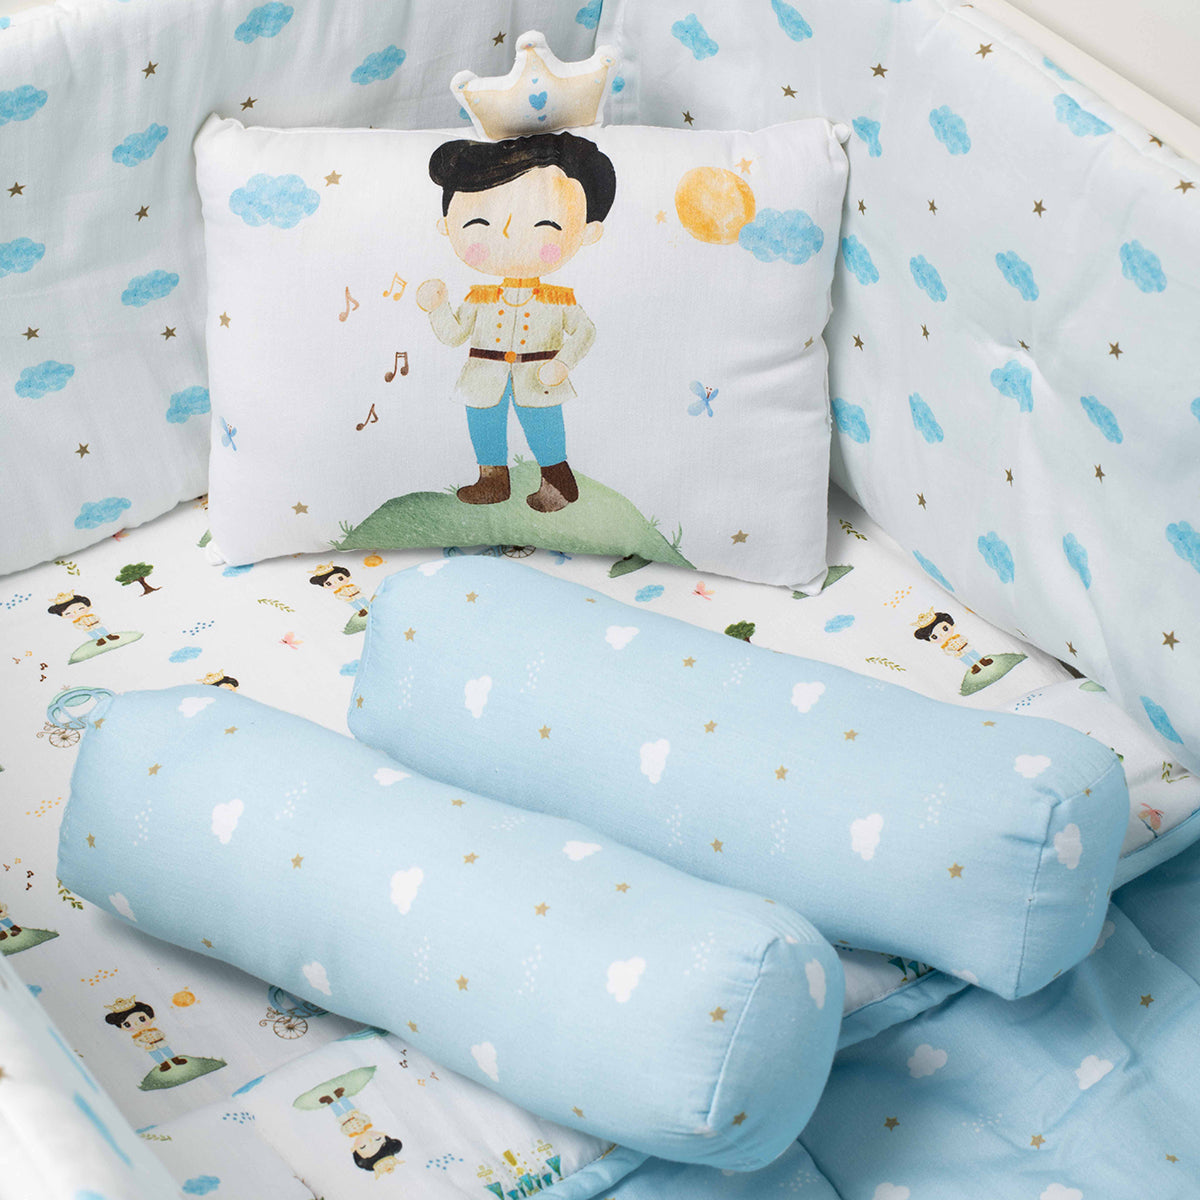 Tiny Snooze Cot Bedding Set – The Little Prince